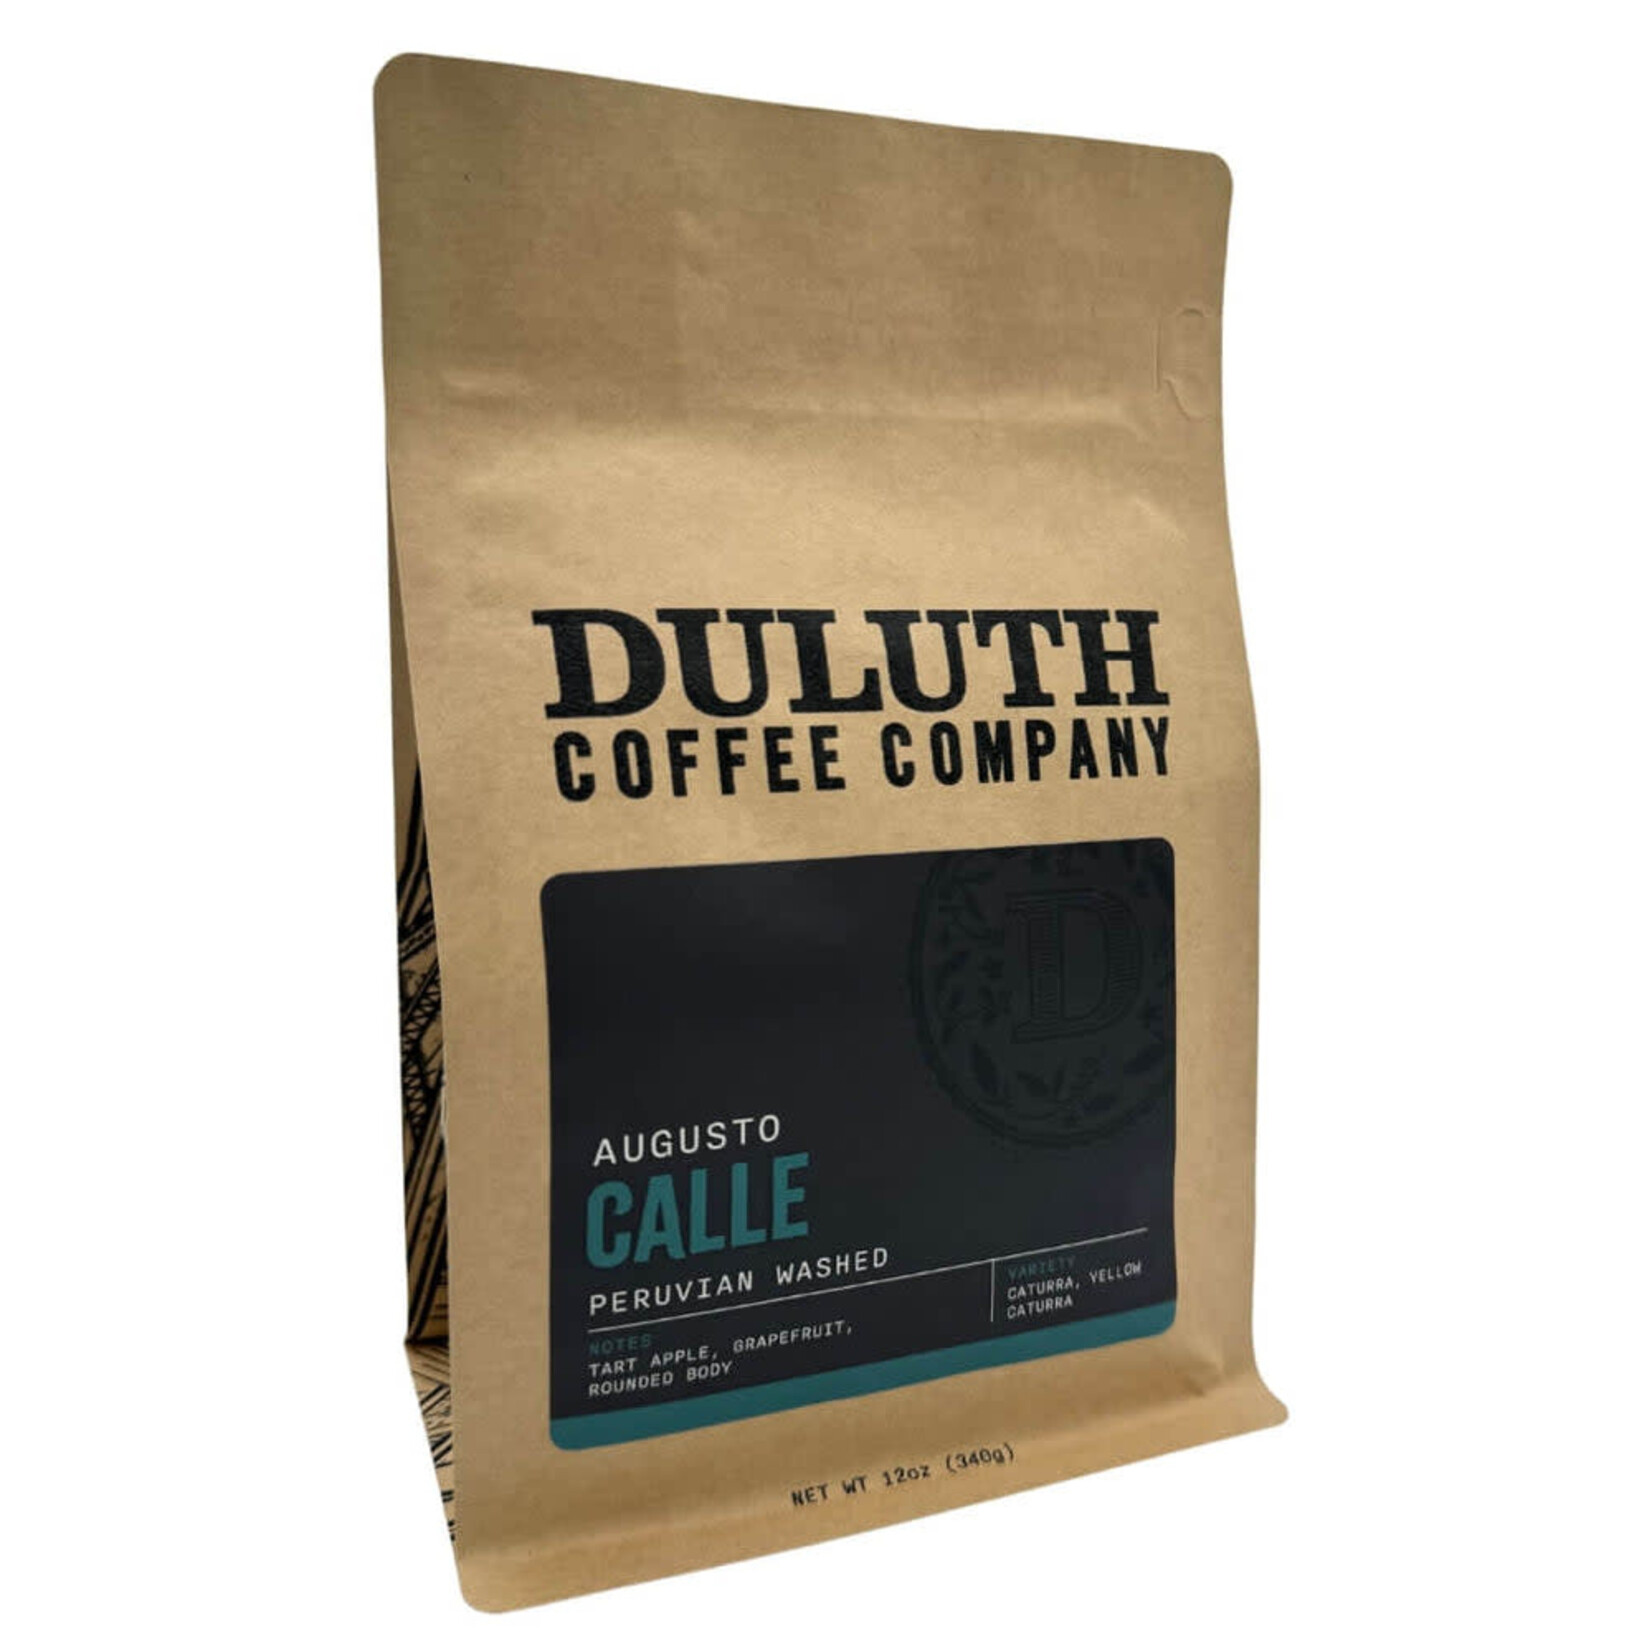 Duluth Coffee Company Augusto Calle 12oz Whole Bean